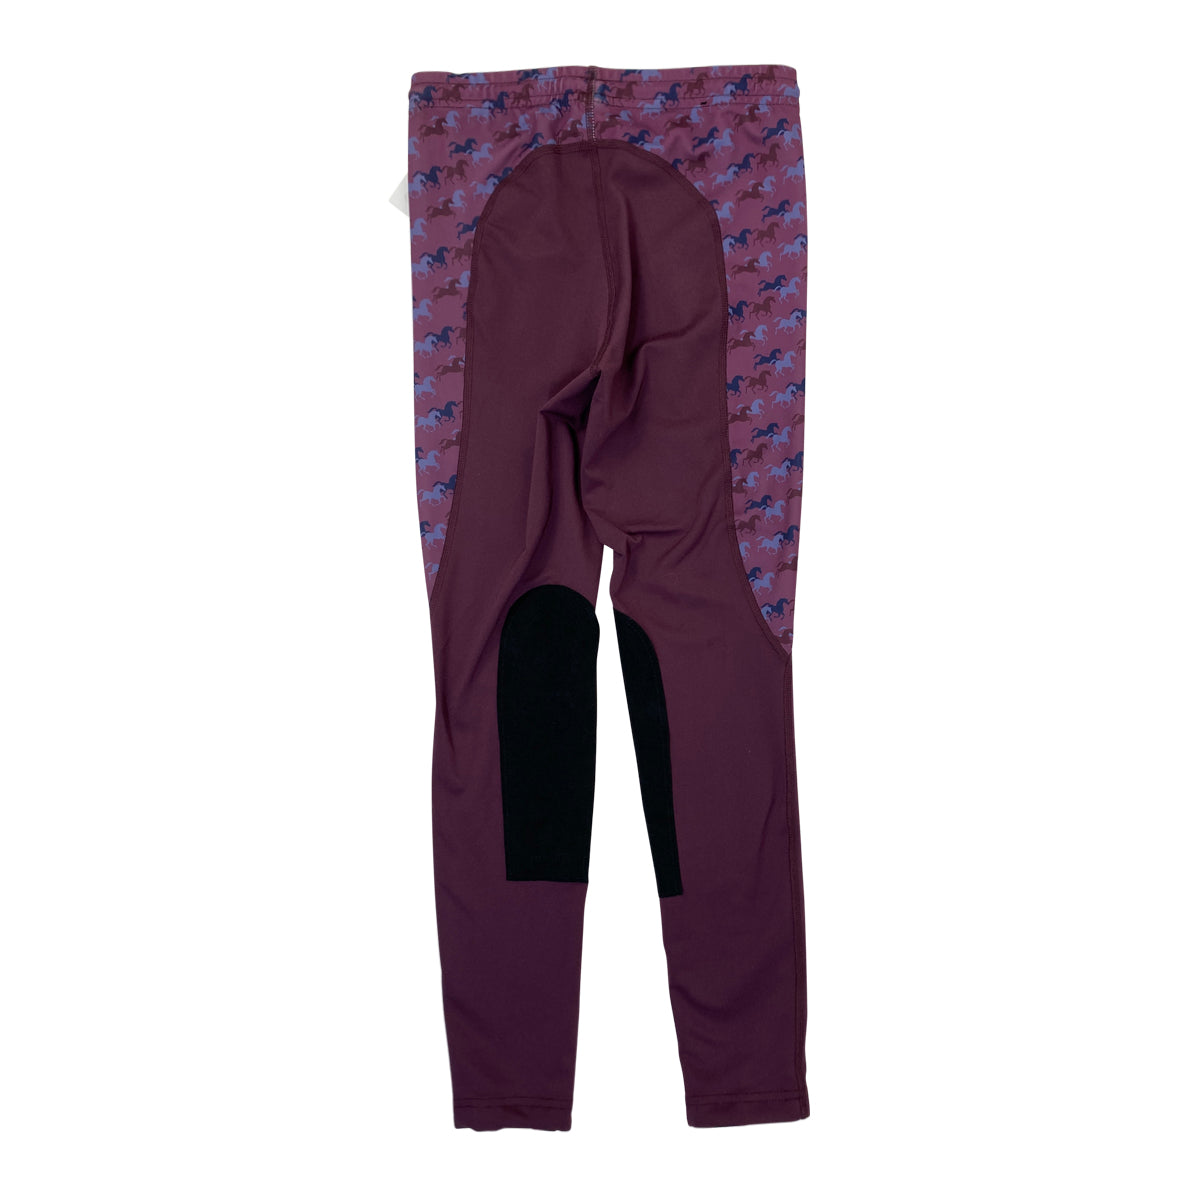 Back of Kerrits Knee Patch Performance Tights in Huckleberry Horses - Children's Small